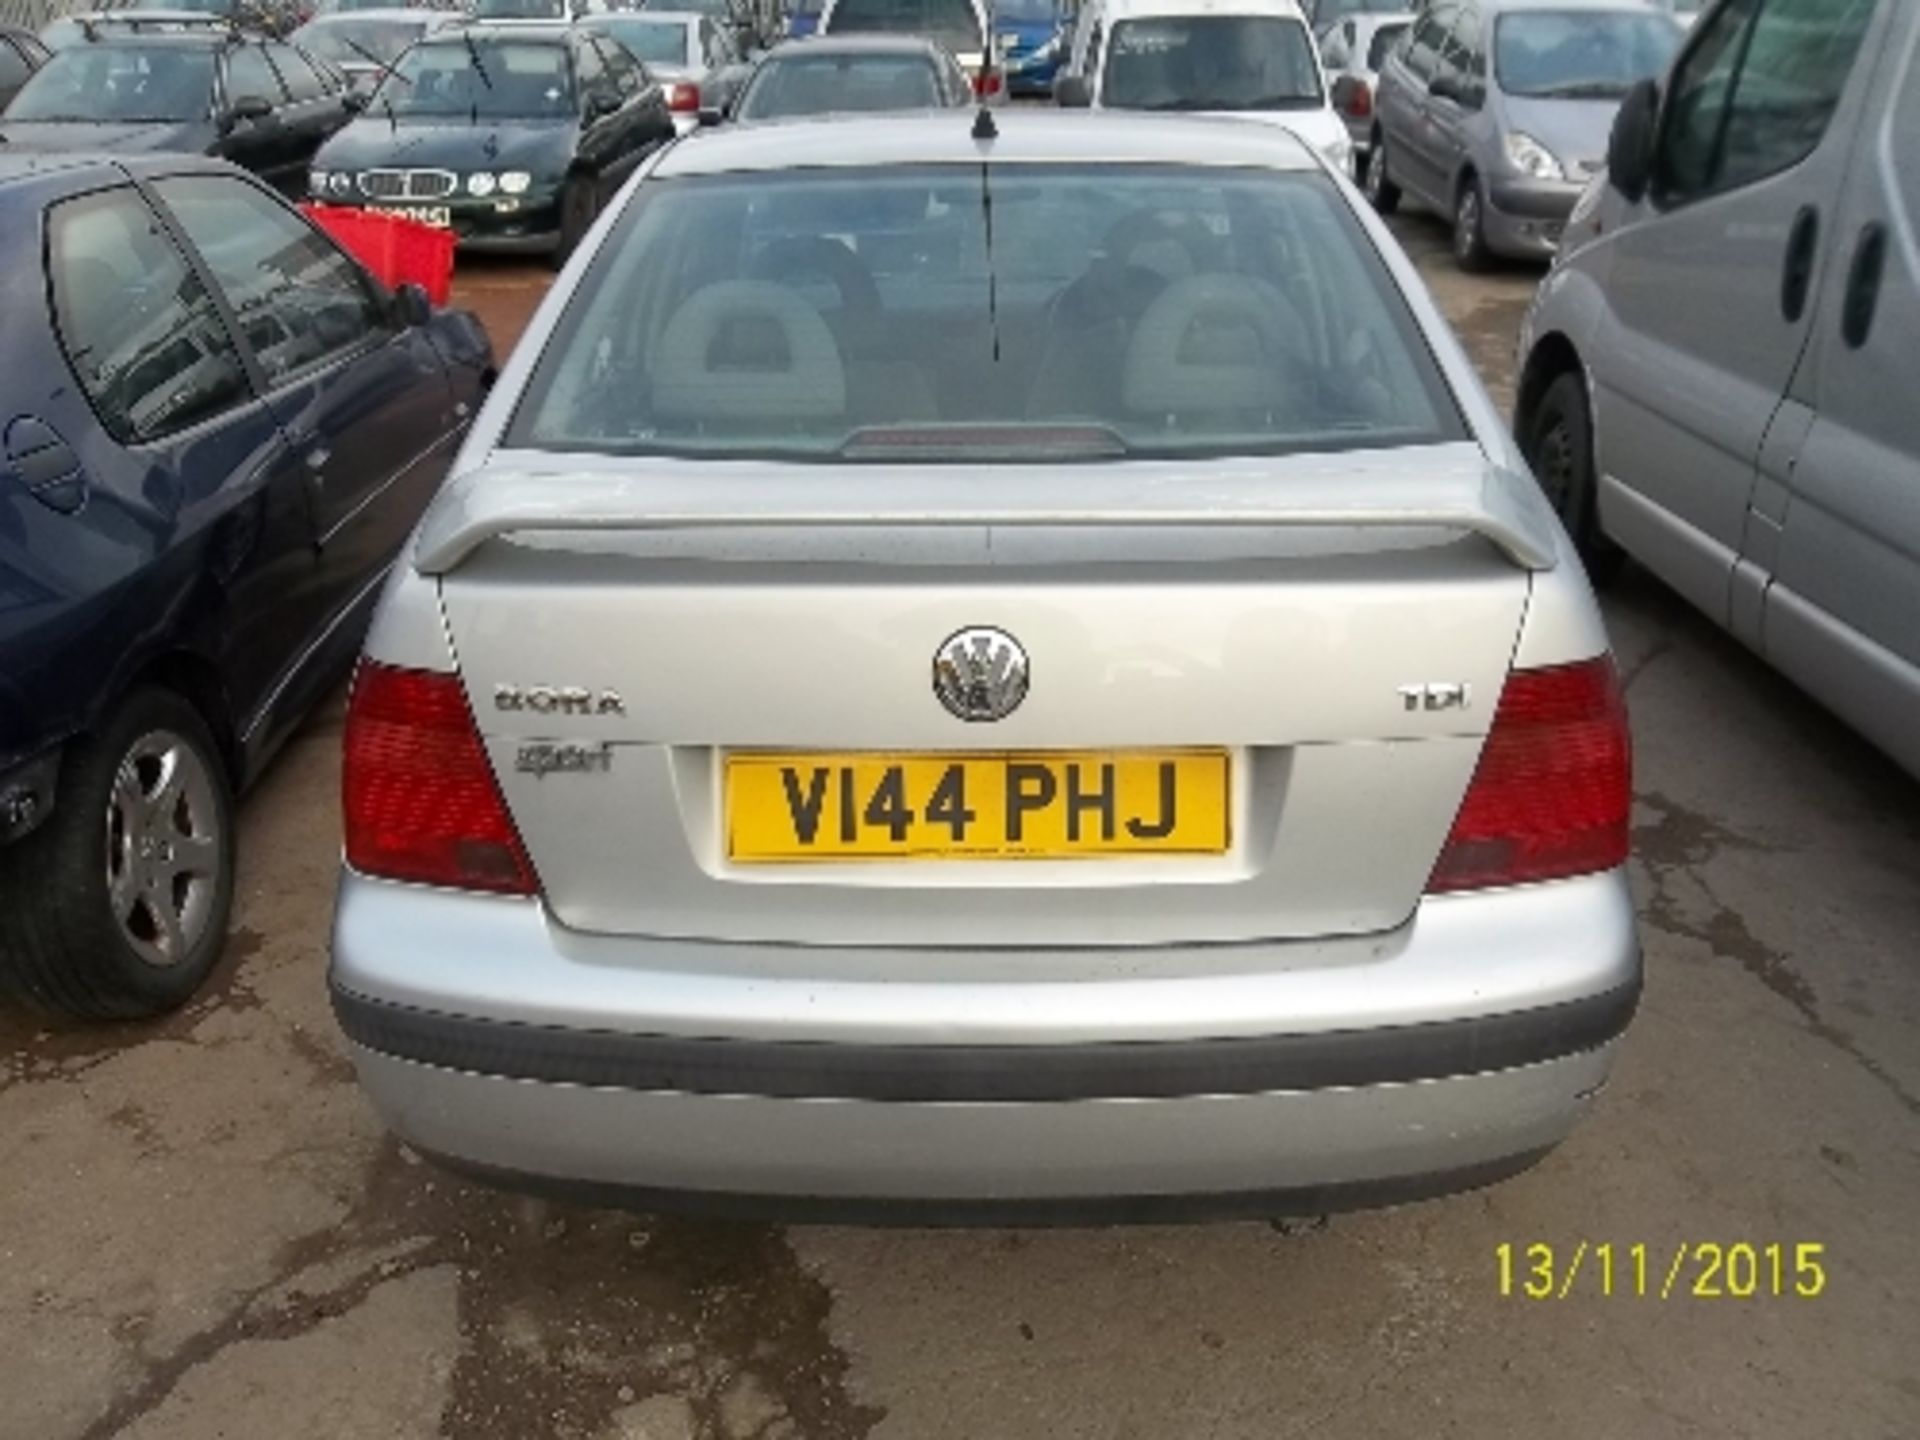 Volkswagen Bora Sport TDI -V144 PHJ This vehicle may be purchased only by the holder of an ATF - Image 2 of 4